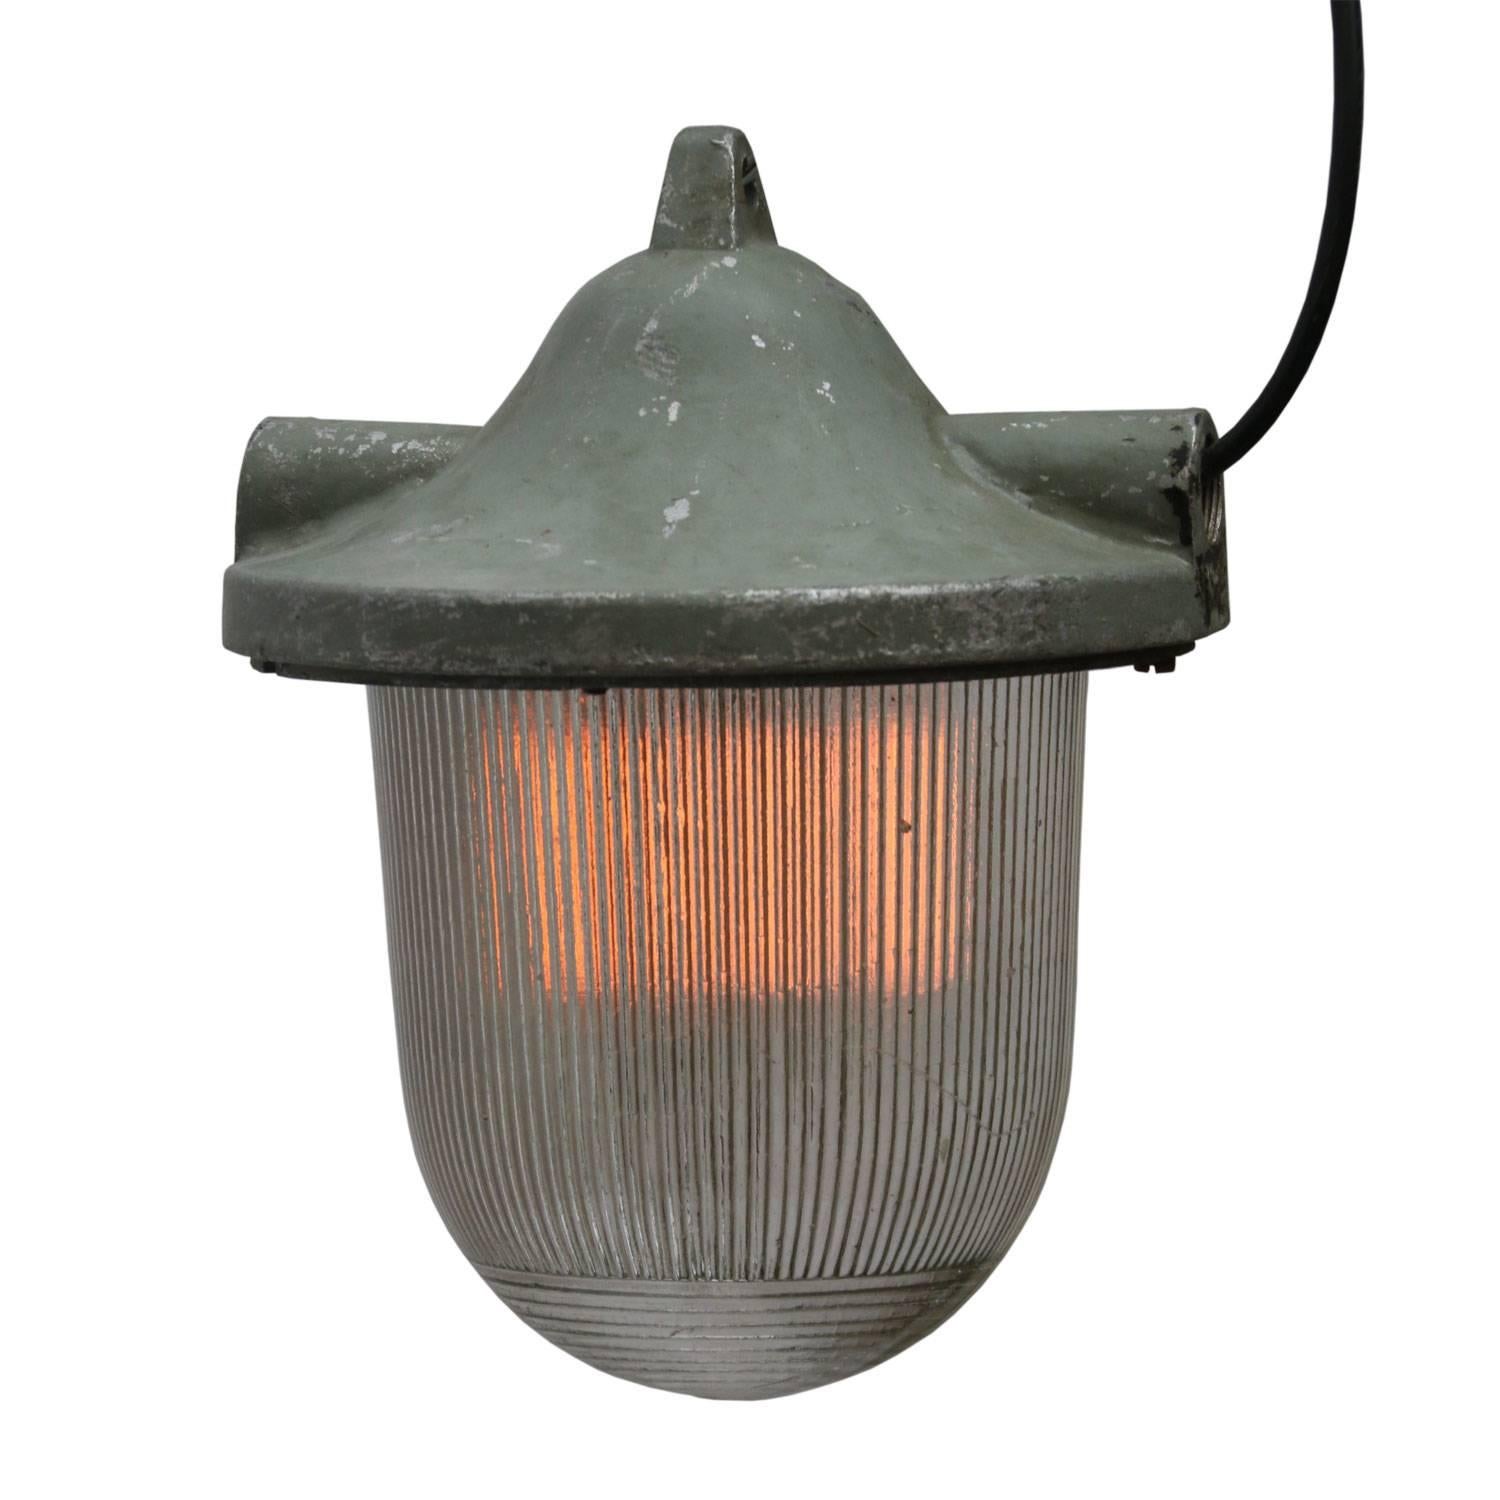 Hanging lamp striped glass. Gray cast aluminium top.

Weight: 2.9 kg / 6.4 lb

All lamps have been made suitable by international standards for incandescent light bulbs, energy-efficient and LED bulbs. E26/E27 bulb holders and new wiring are CE